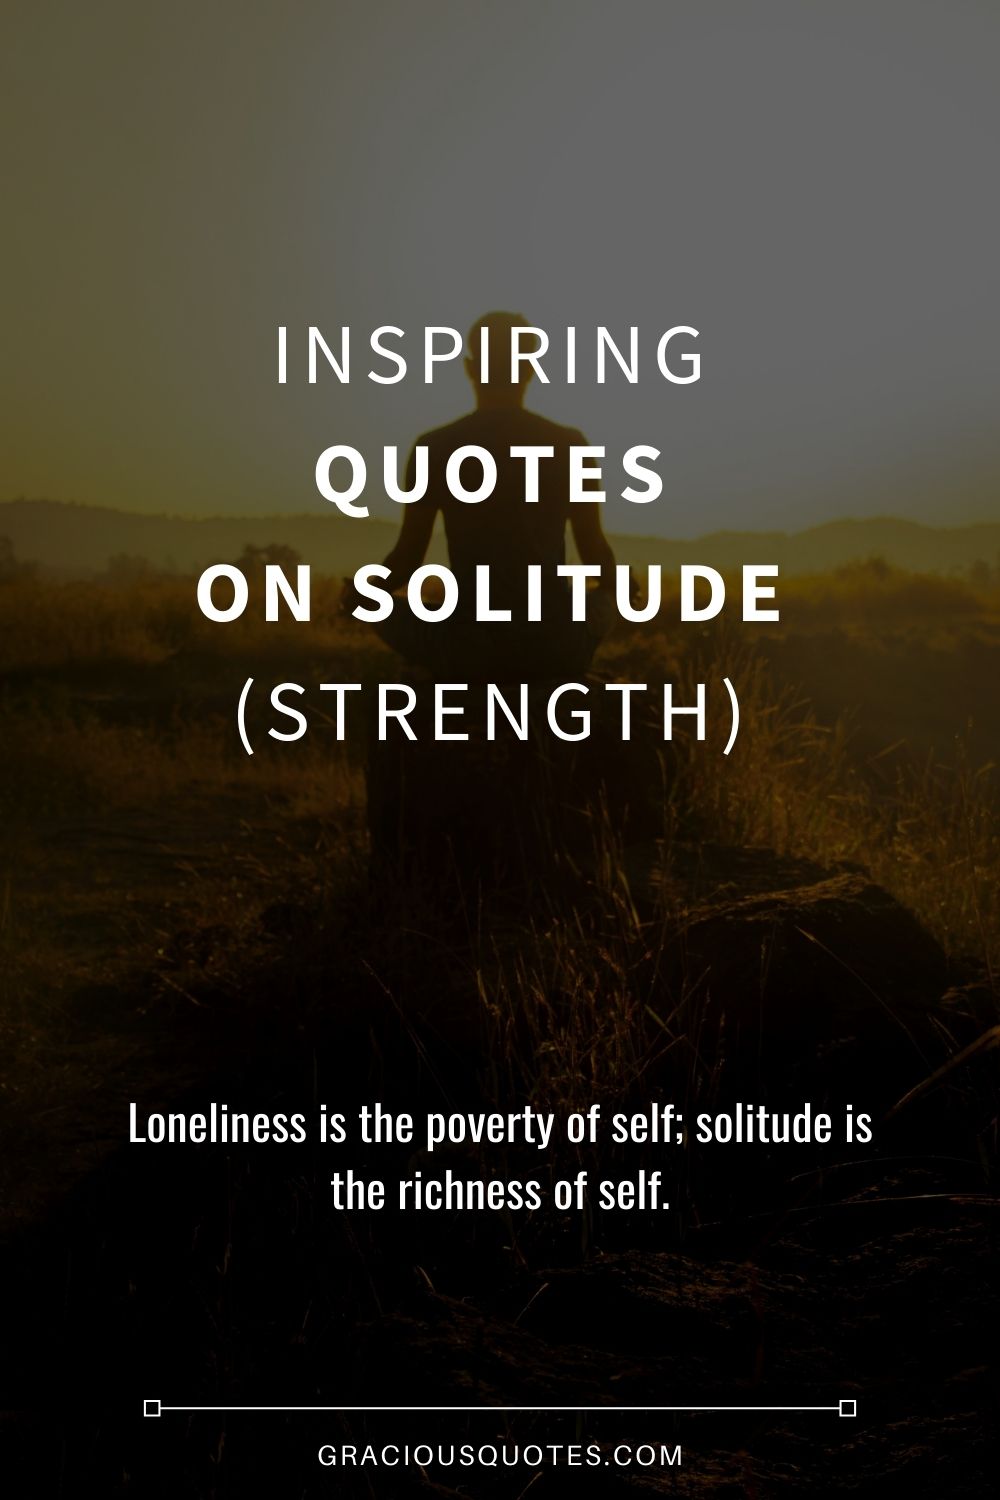 77 Inspiring Quotes on Solitude (STRENGTH)